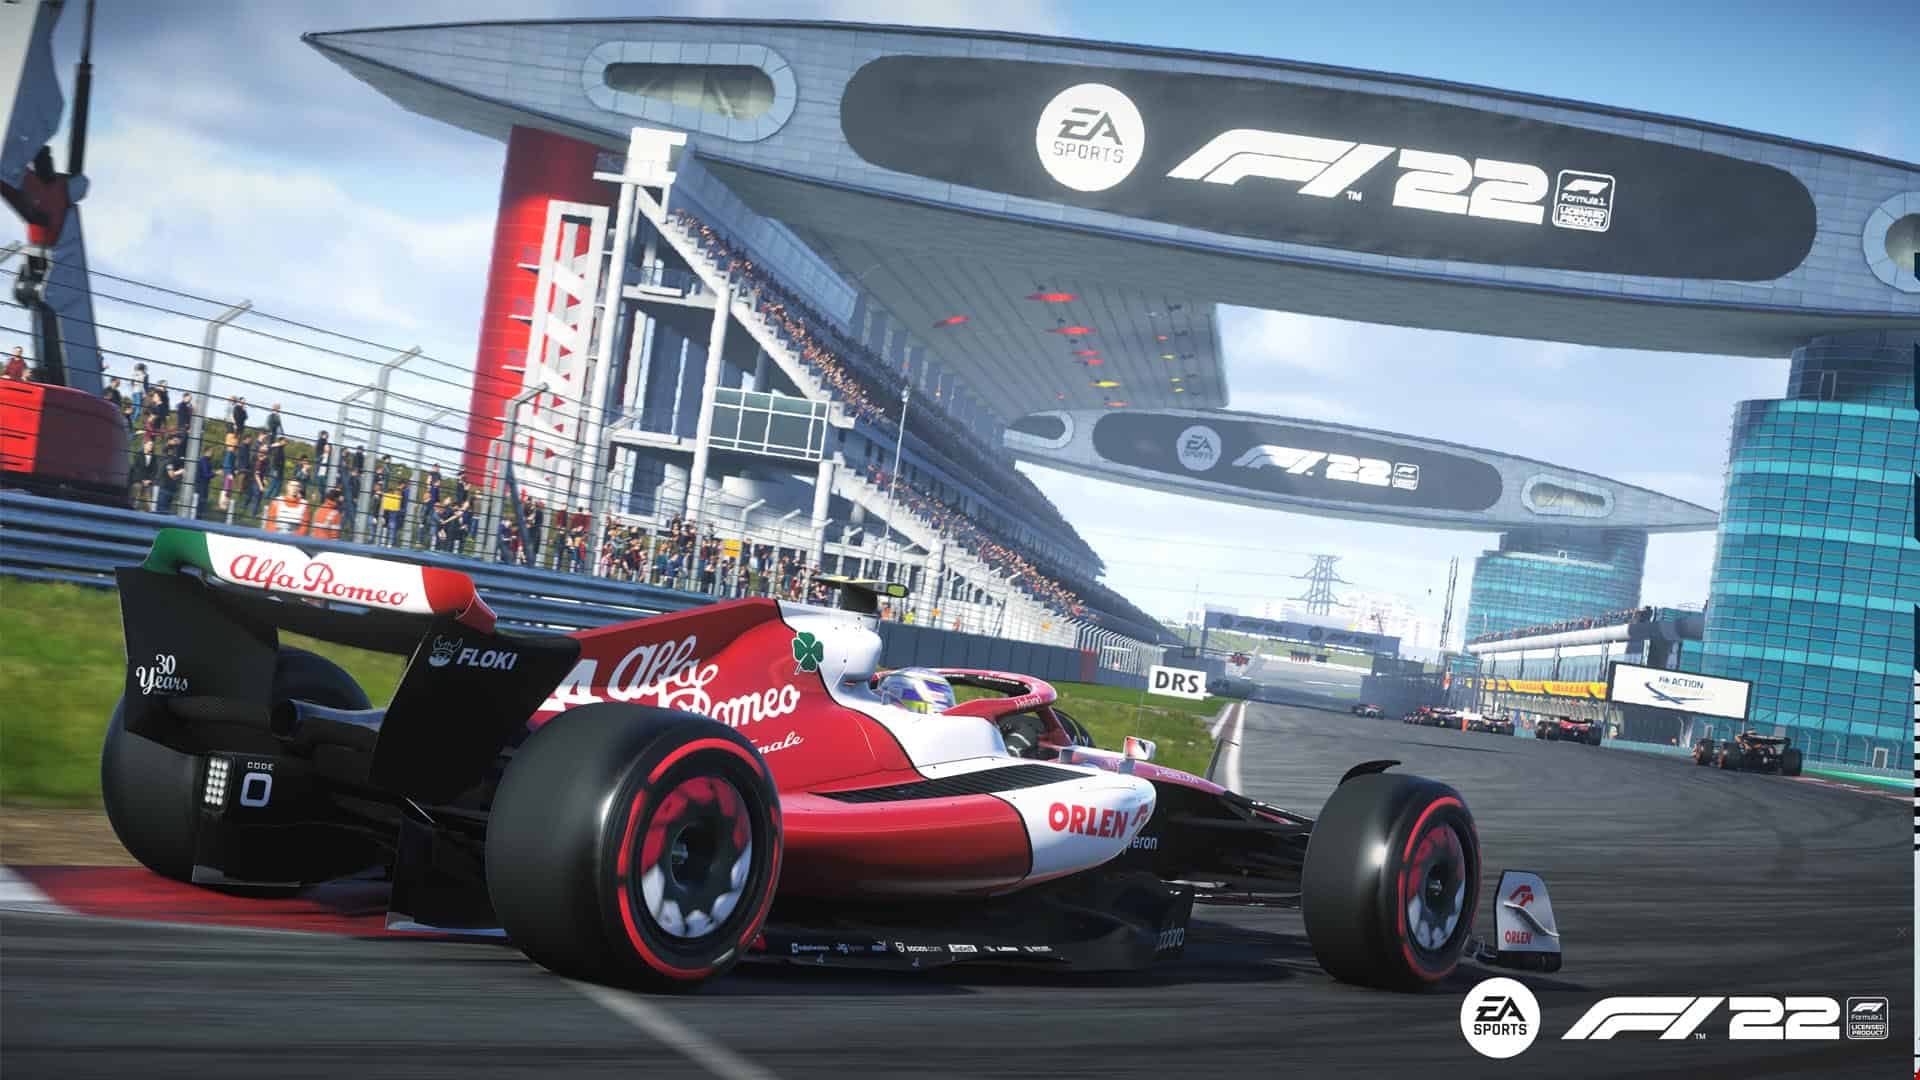 Shanghai International Circuit arrives this month for F1 22 game